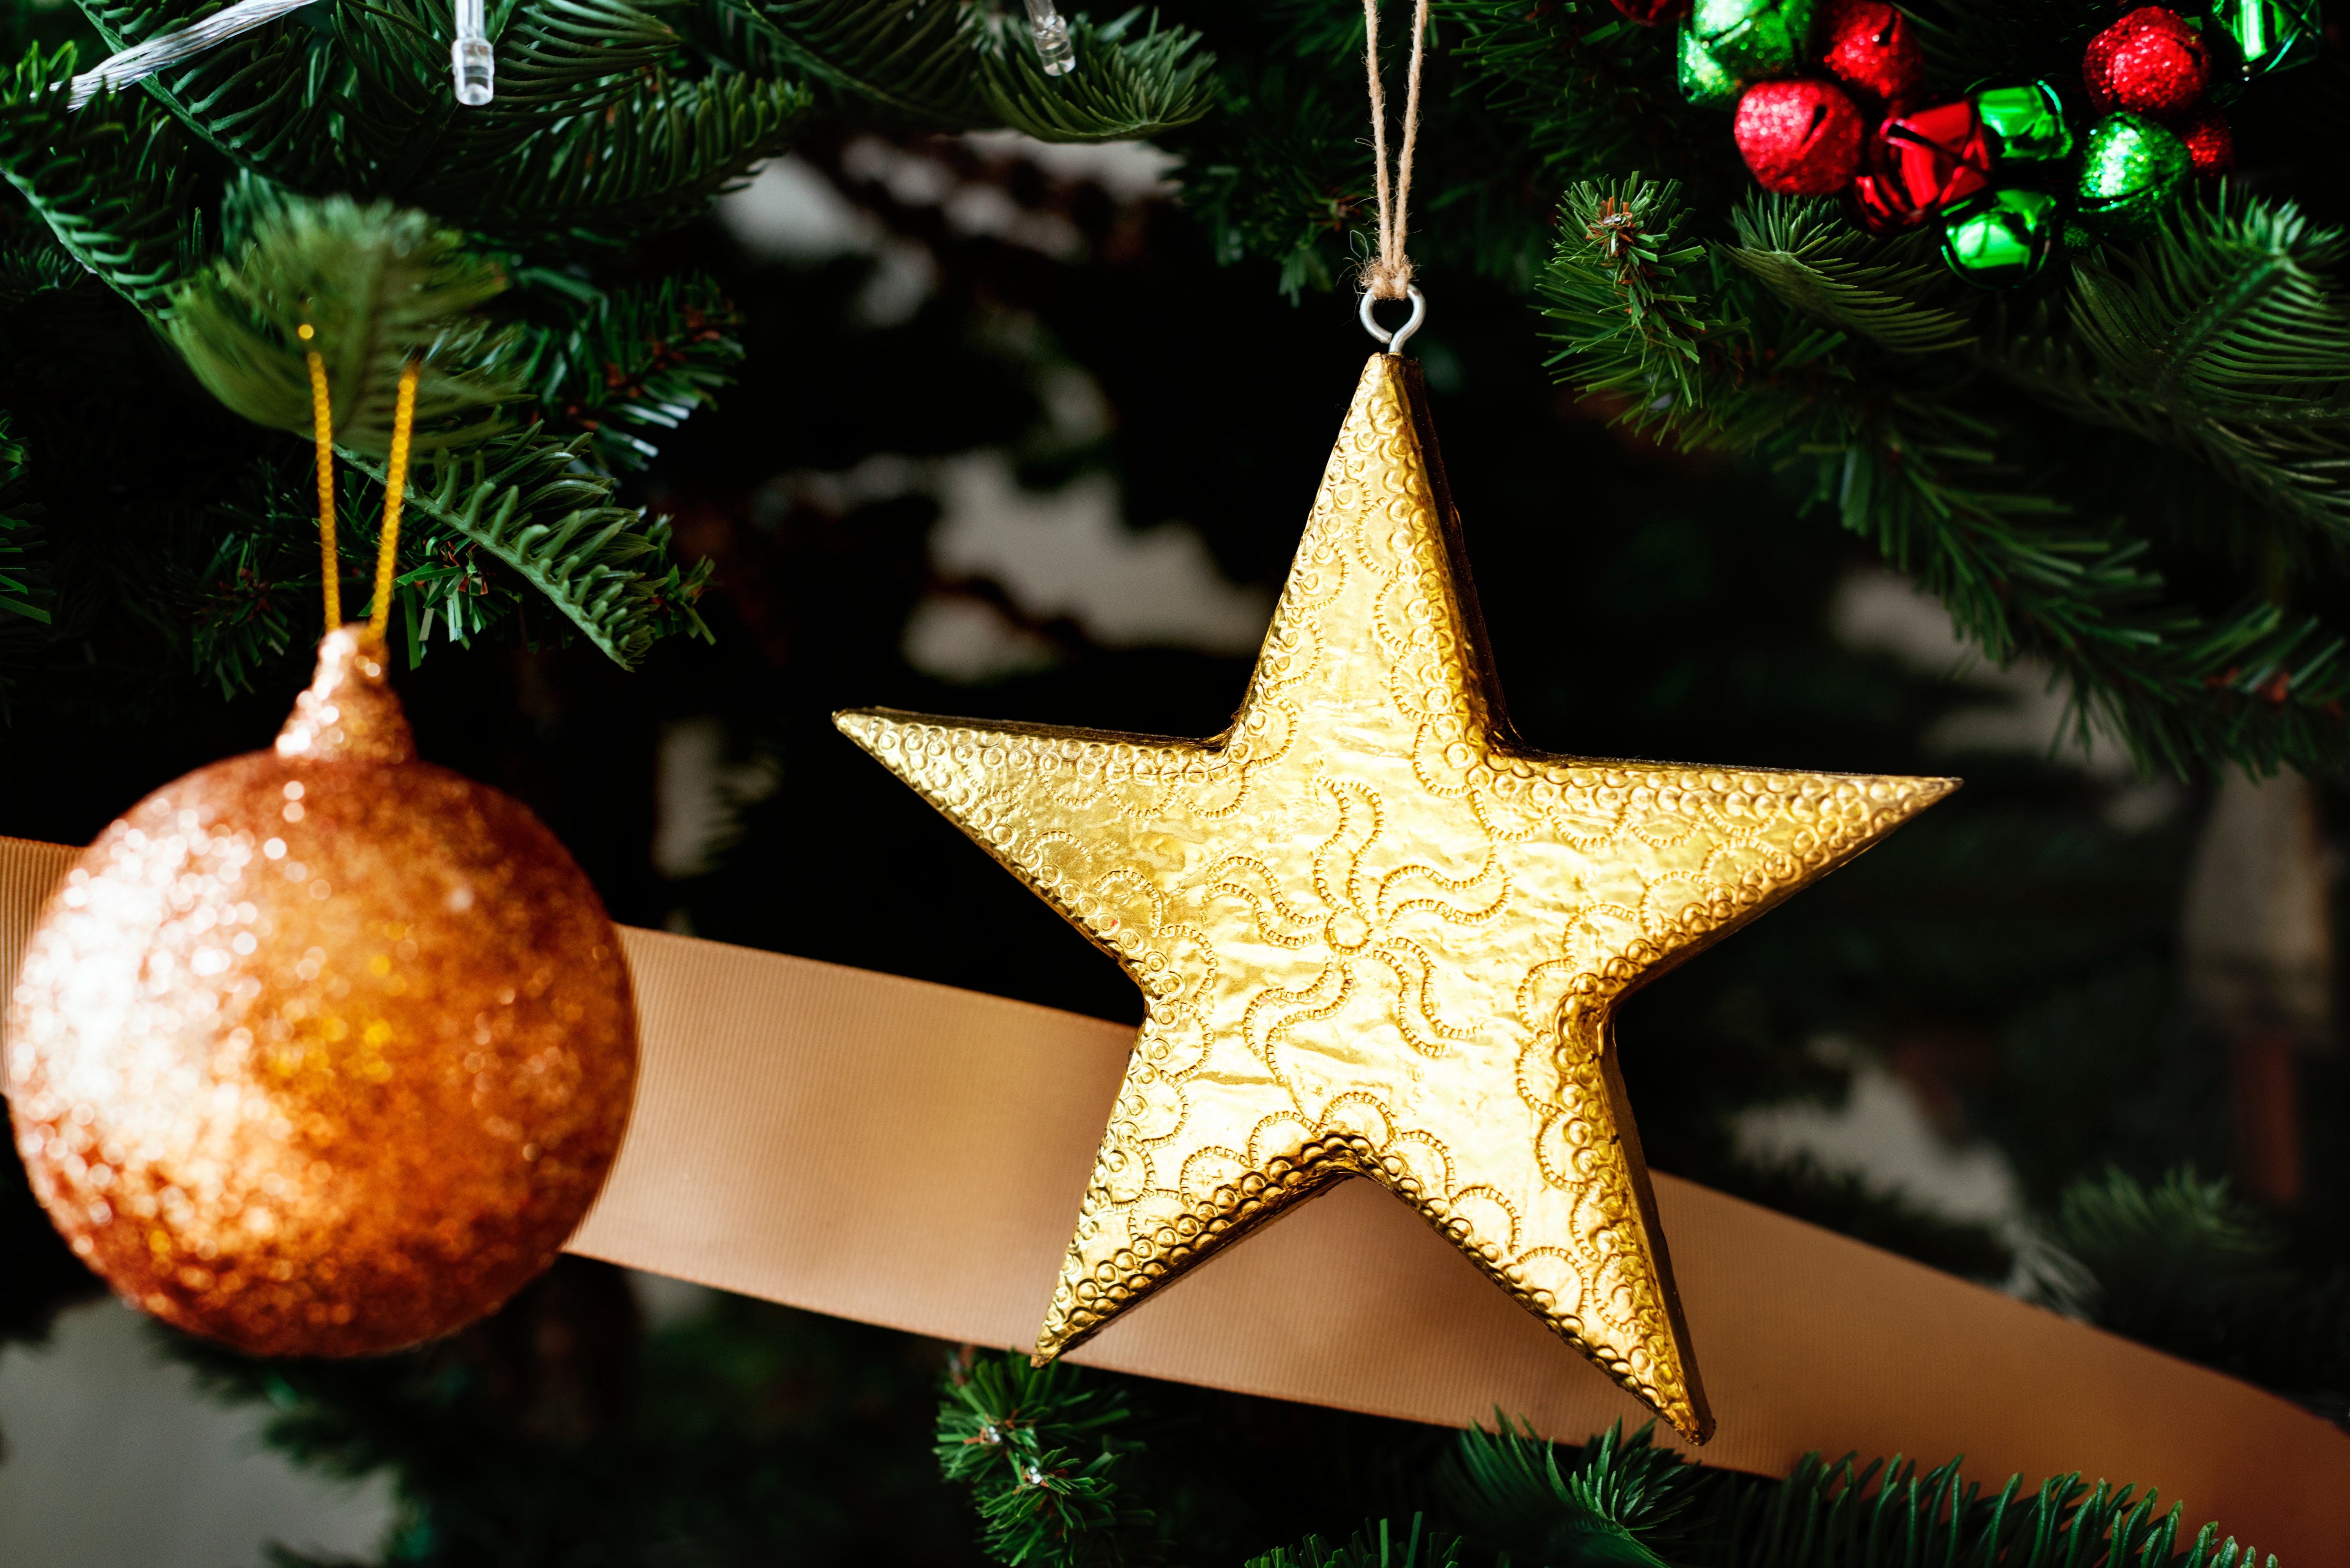 Yellow Star and Orange Bauble, Bauble, New year's eve, Winter, Vacation, HQ Photo